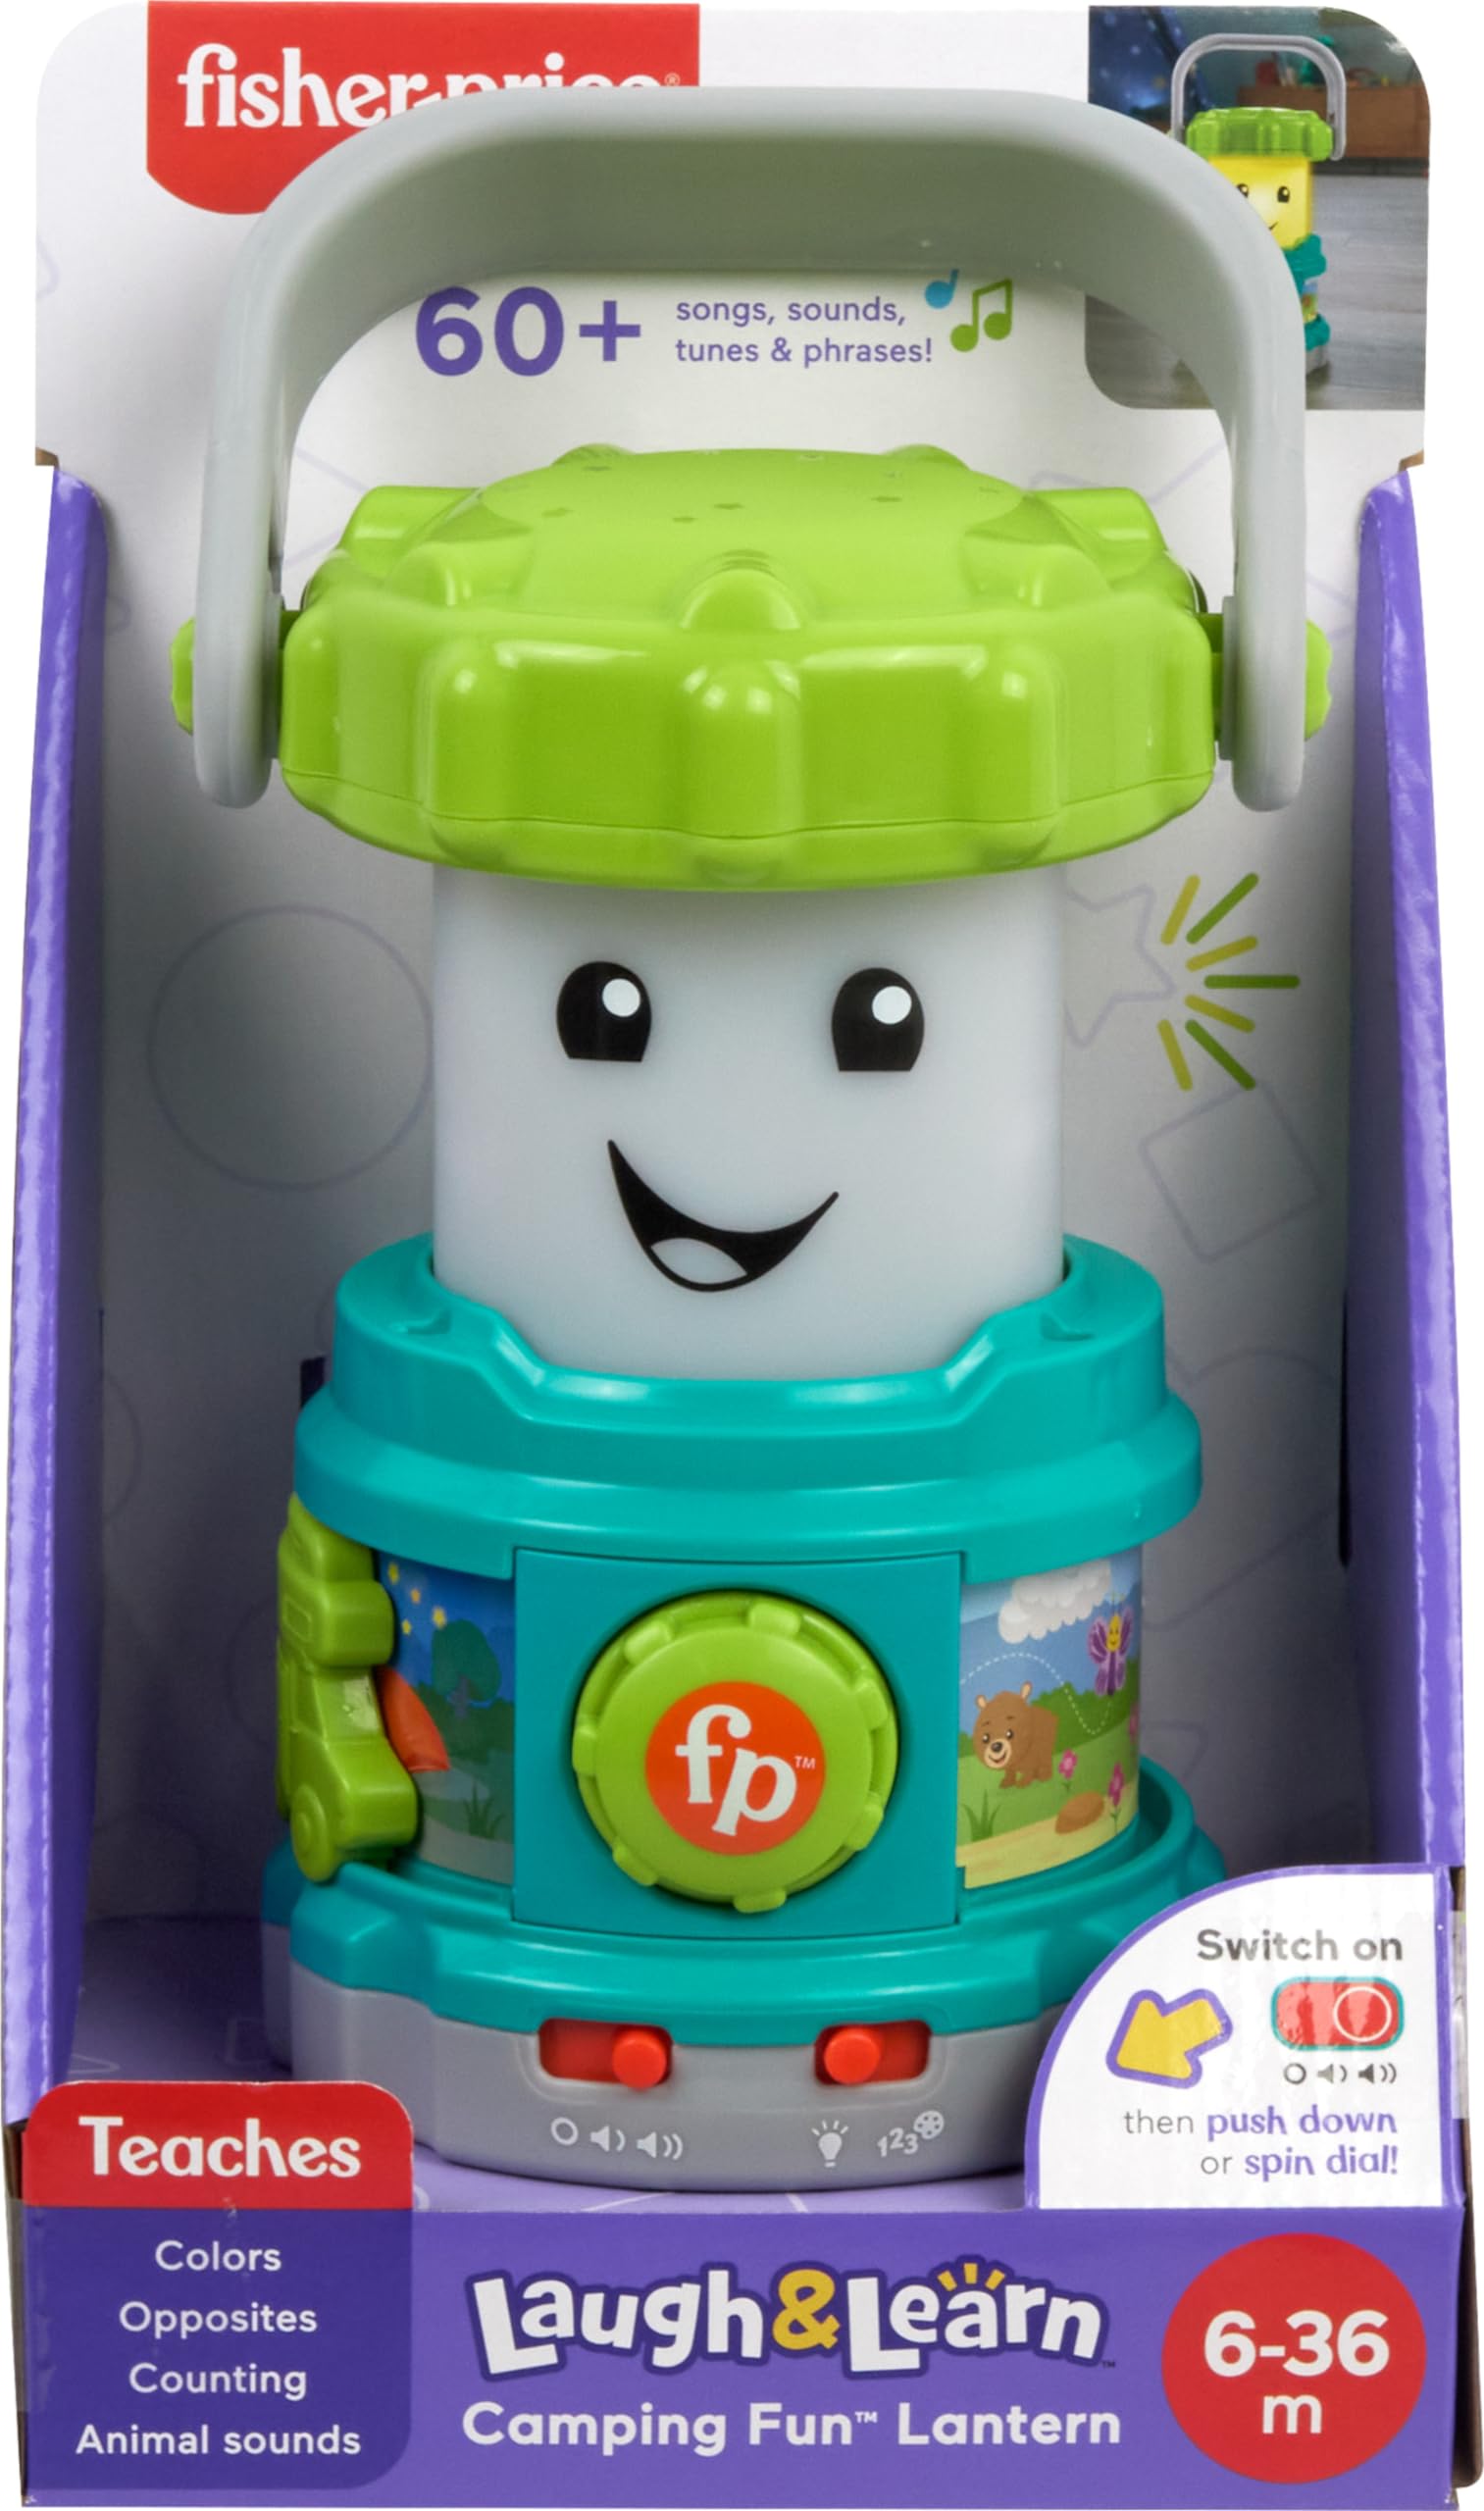 Fisher-Price Laugh & Learn Baby Learning Toy, Camping Fun Lantern, Pretend Camping Gear with Lights & Music for Ages 6+ Months